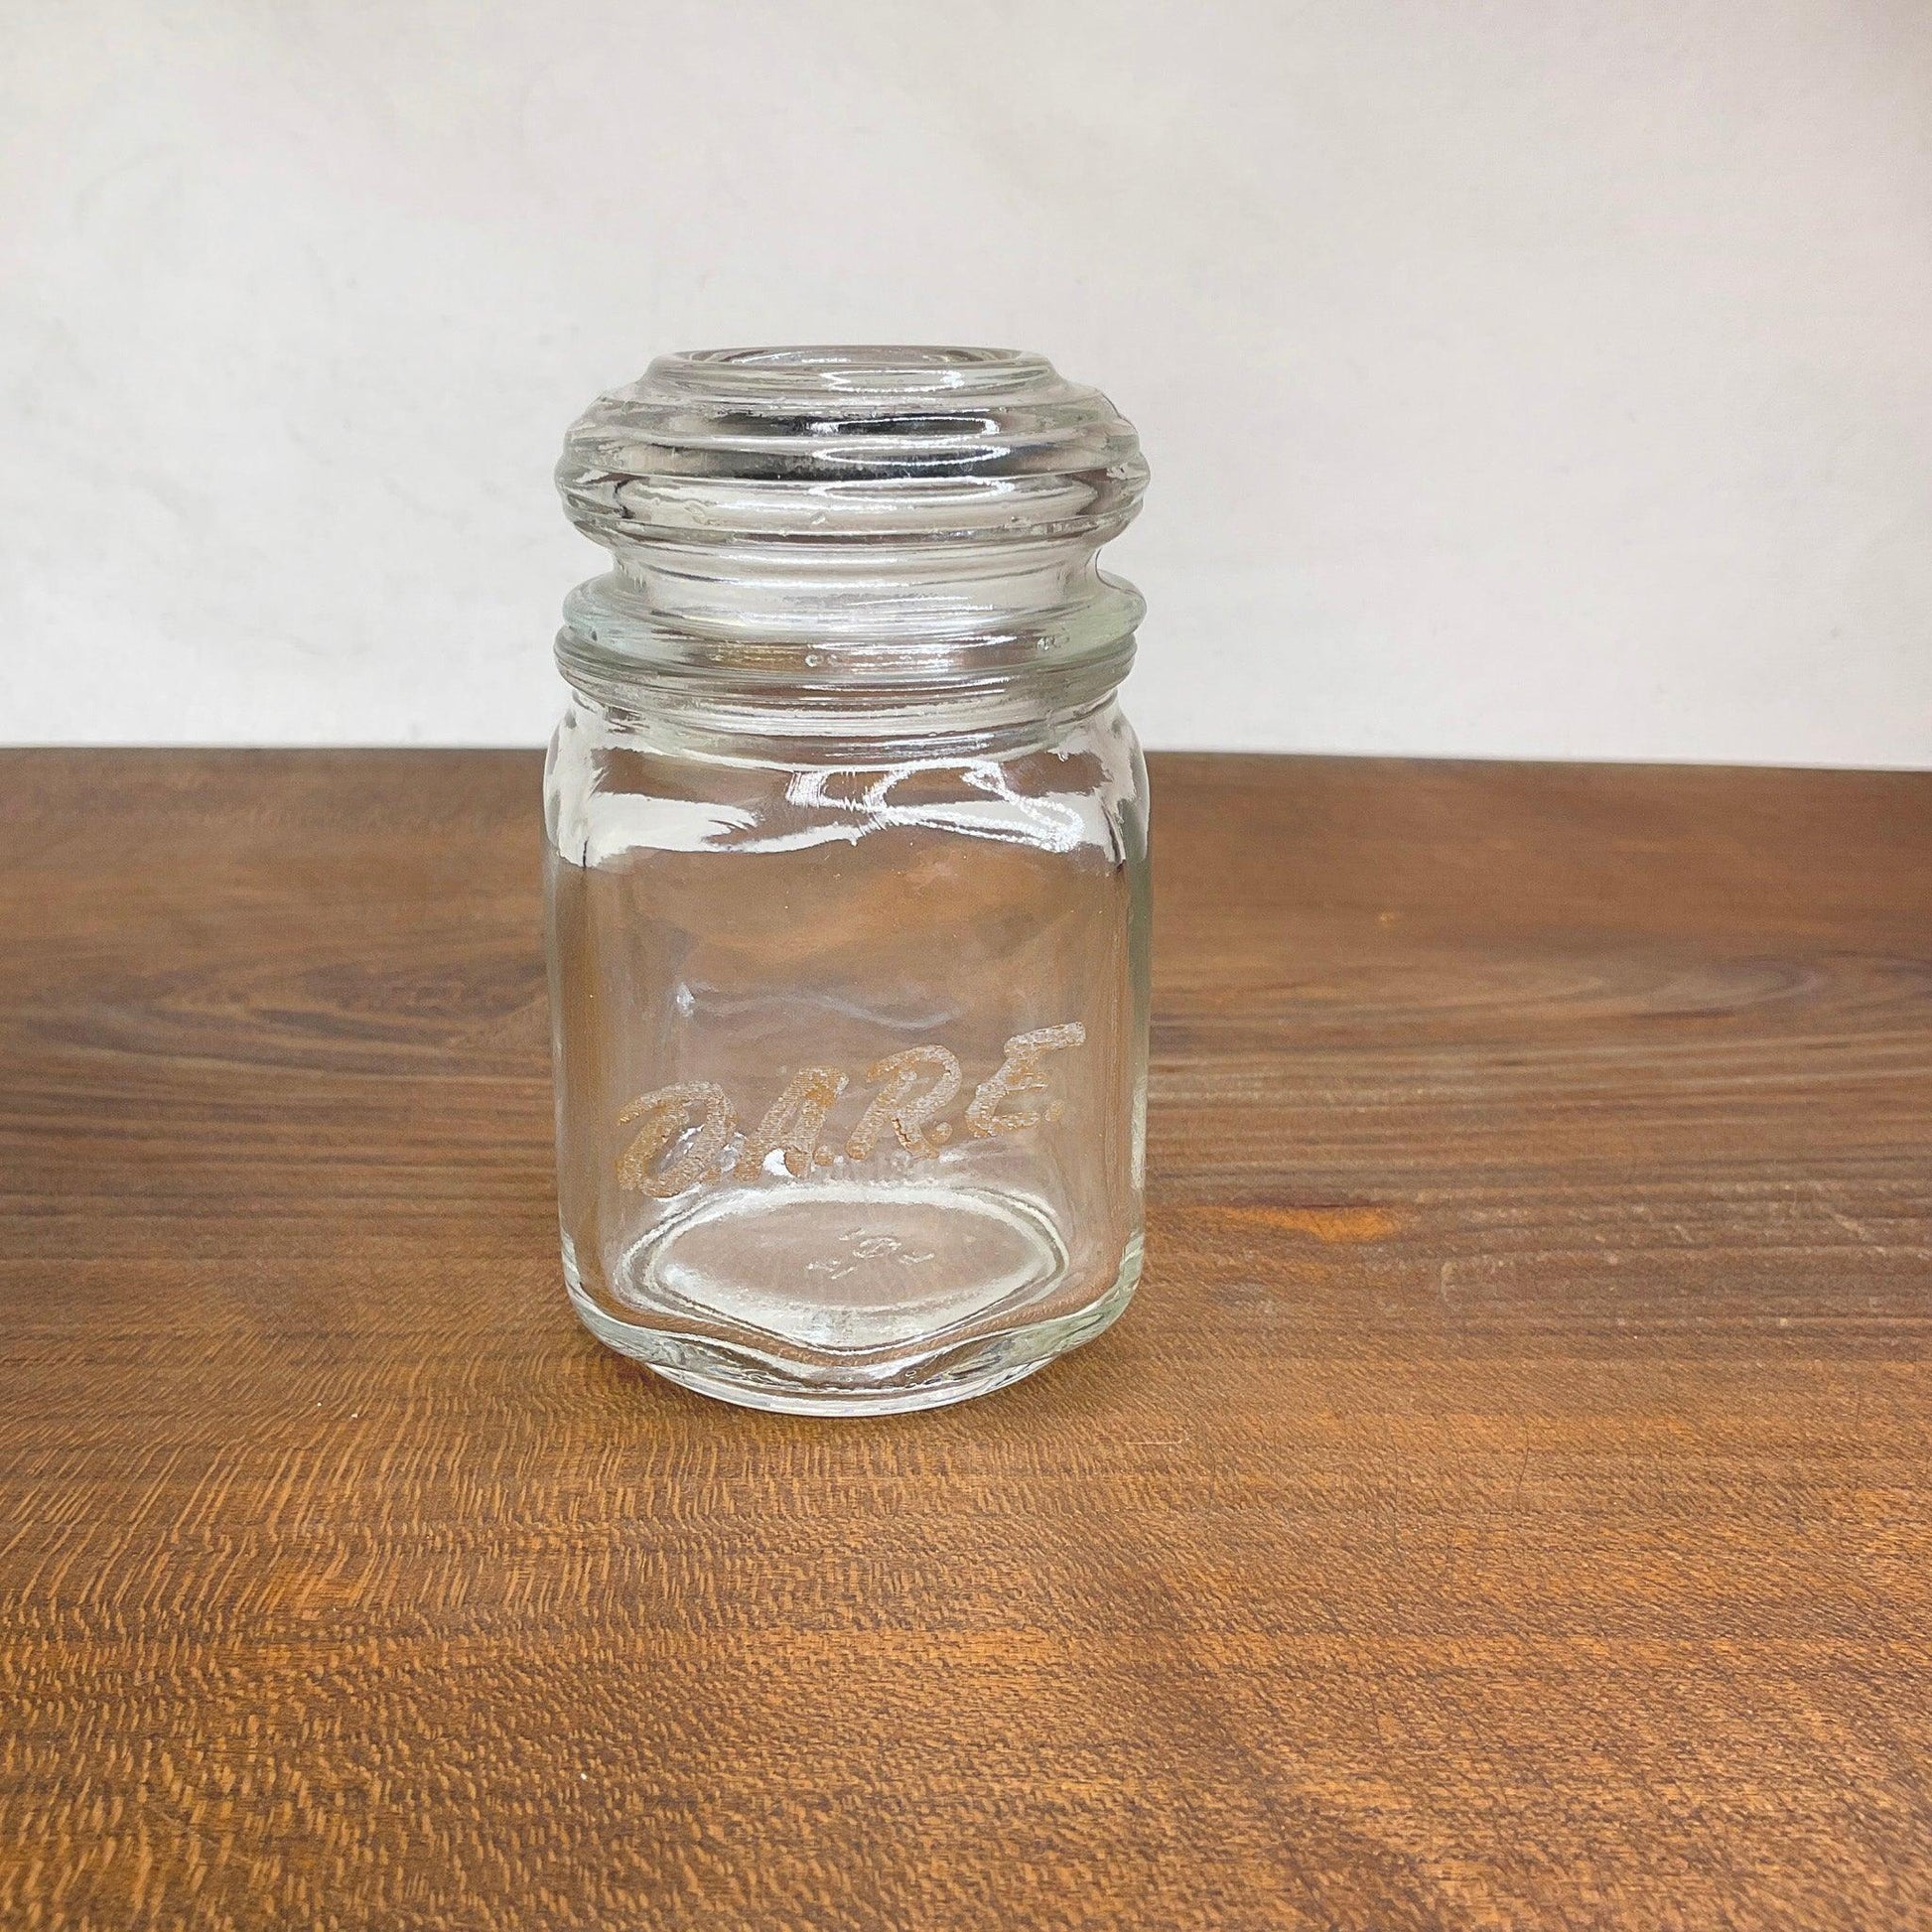 DARE Apothecary Jar - Offensively Domestic